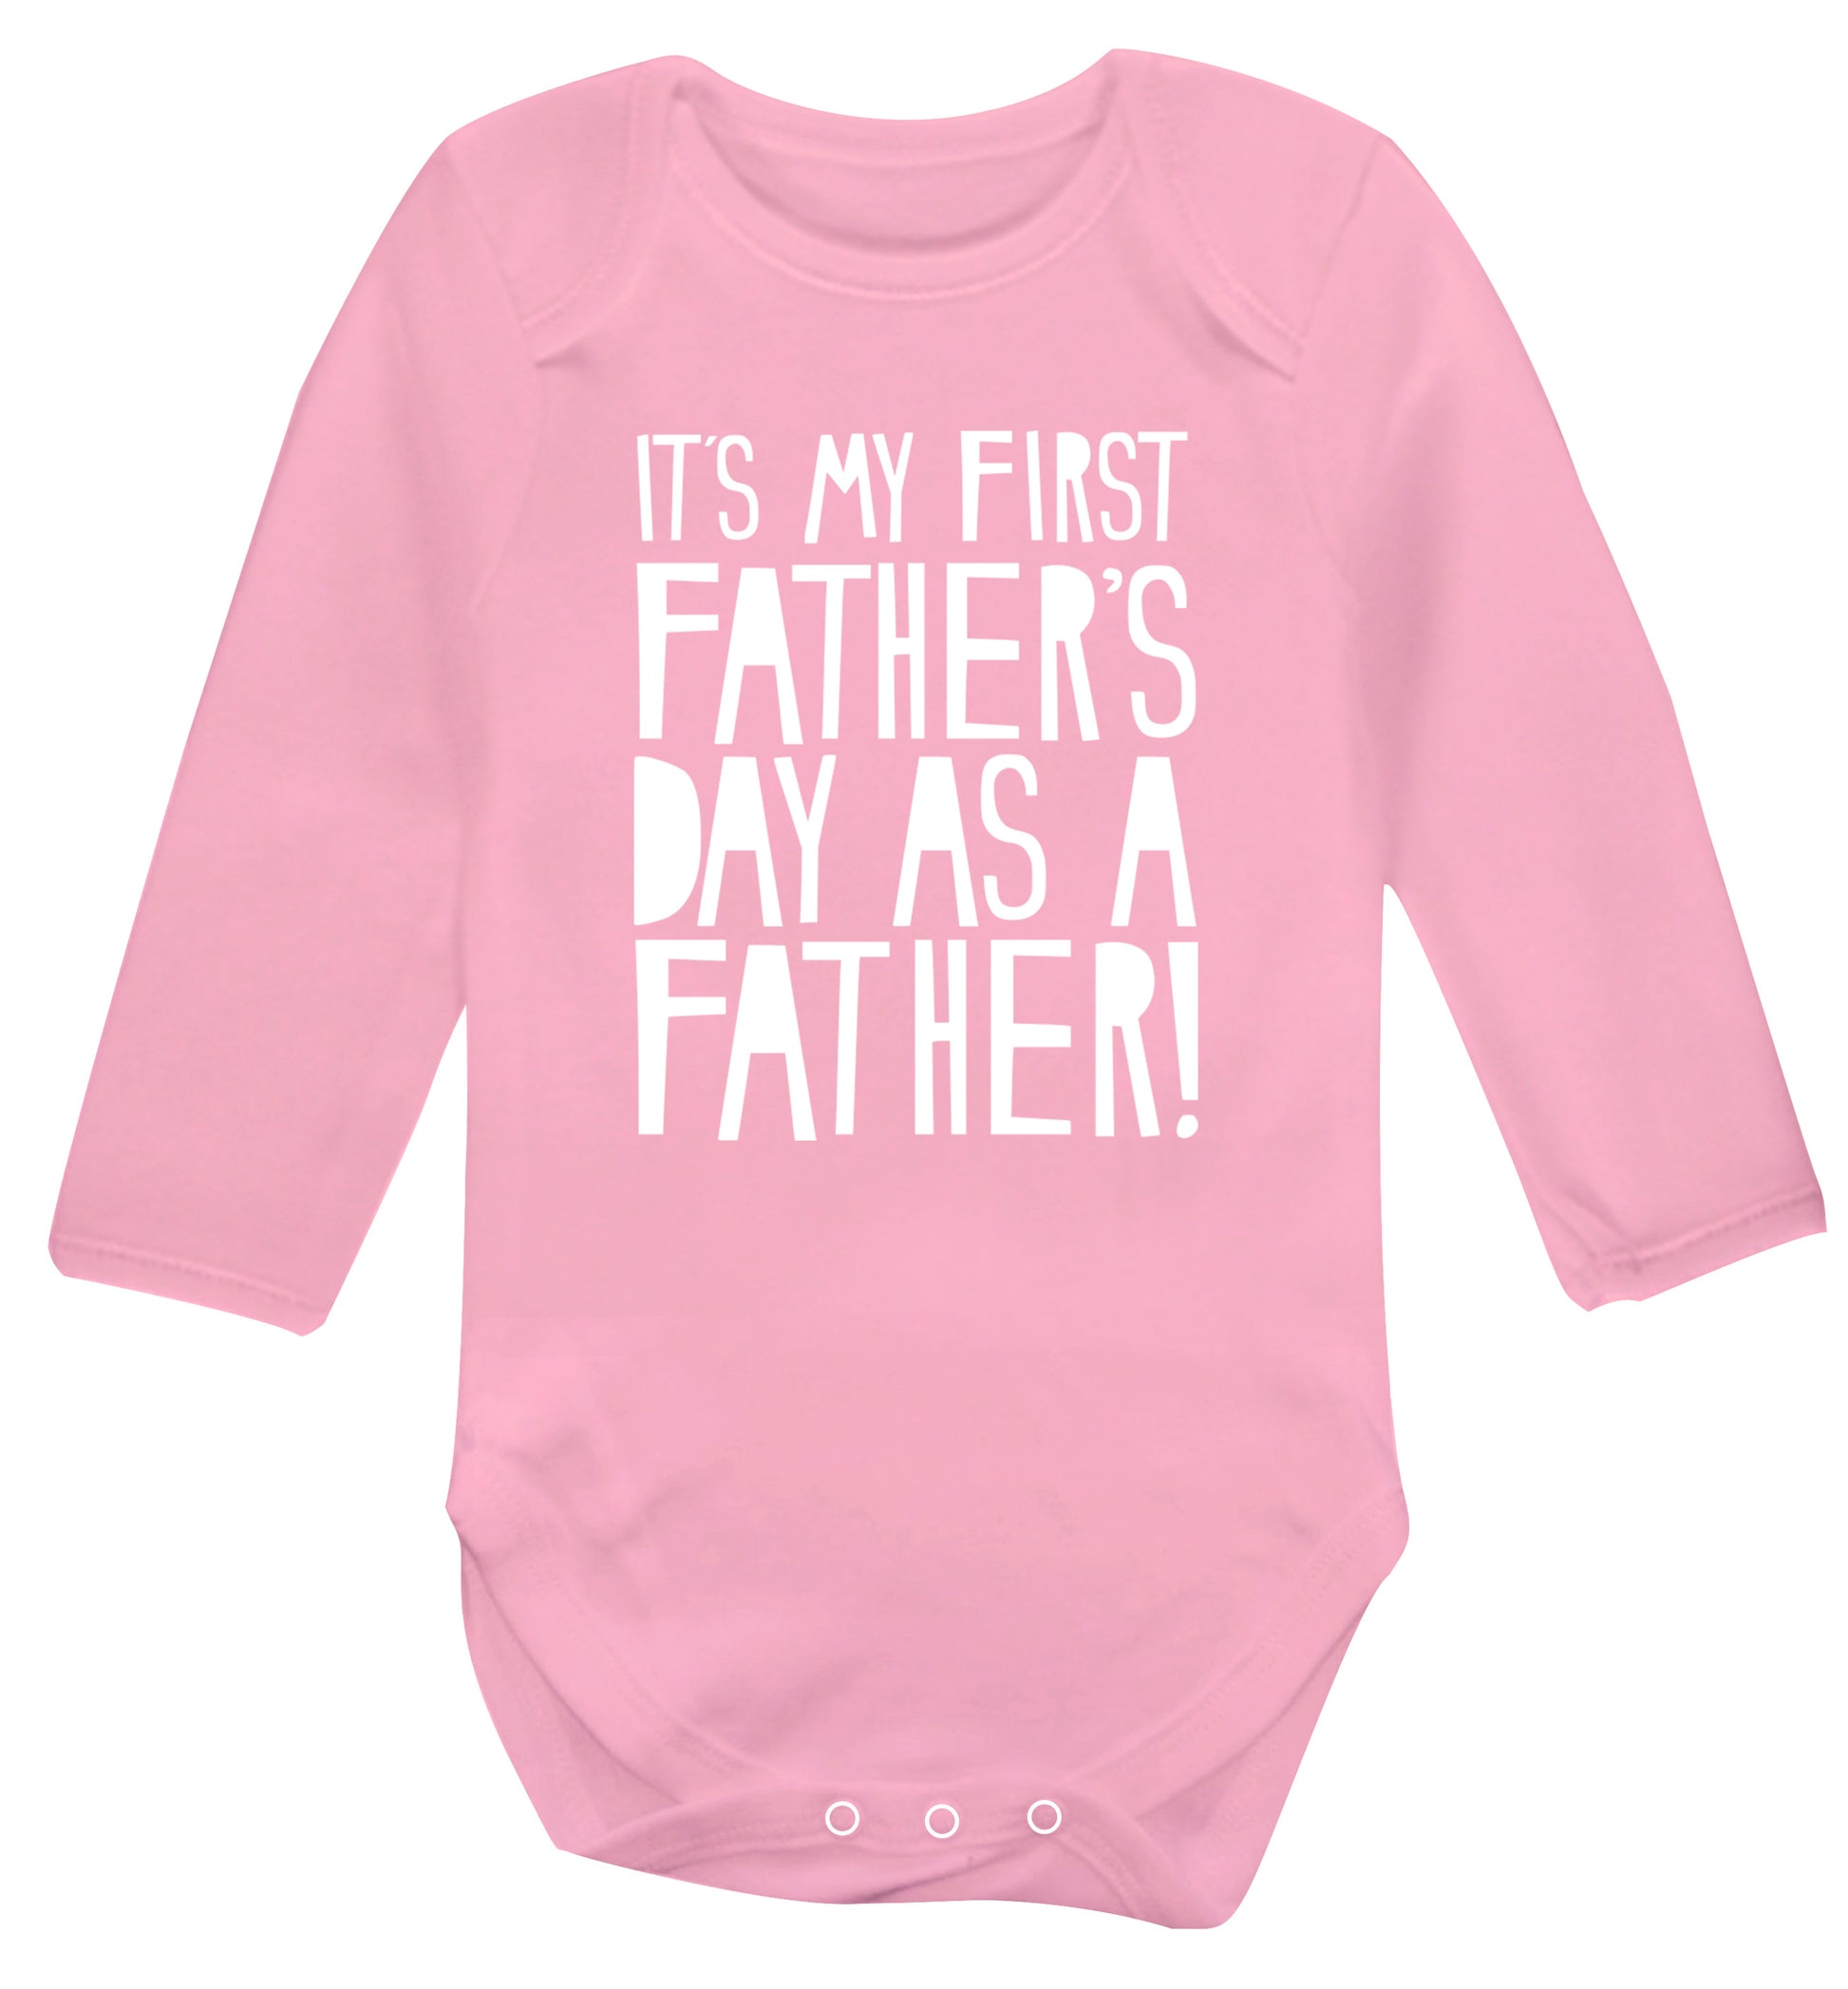 It's my first Father's Day as a father! Baby Vest long sleeved pale pink 6-12 months